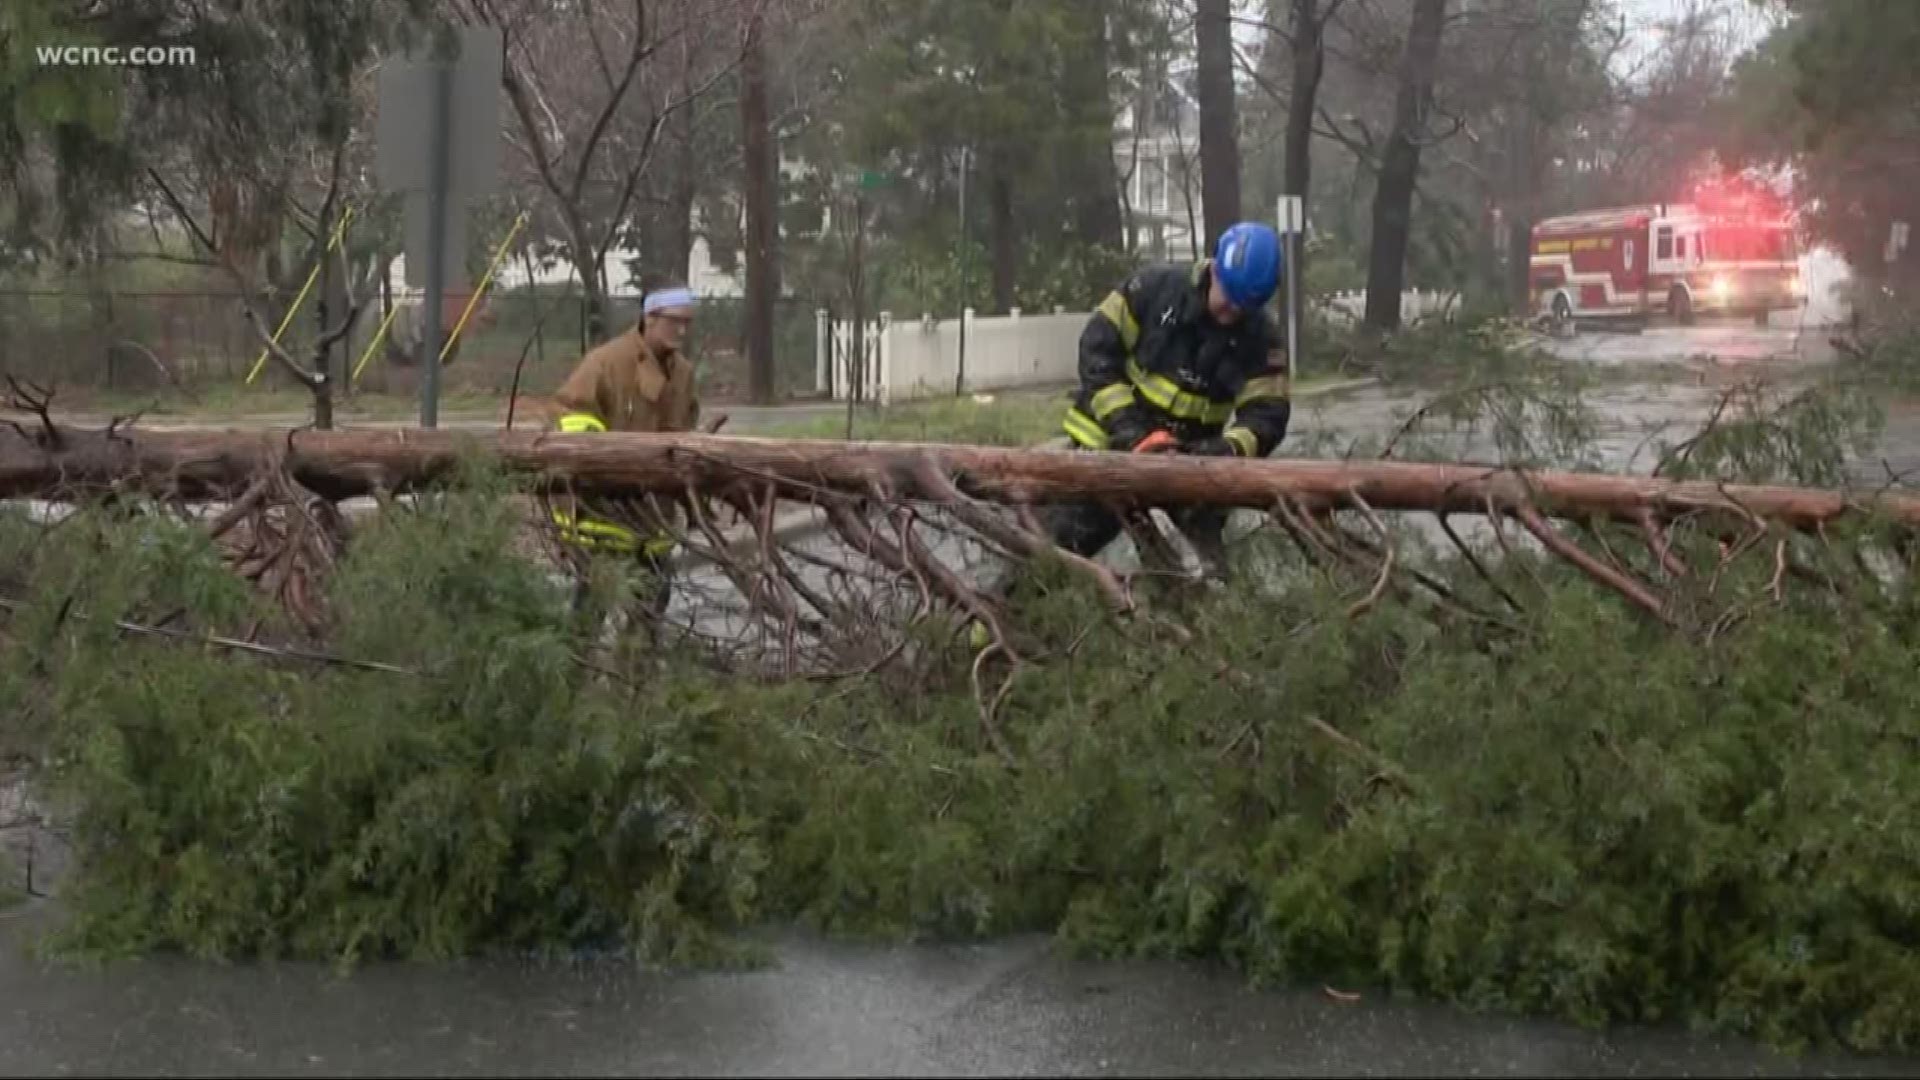 A midday thunderstorm with a possible tornado took down trees and powerlines as it came right through Matthews Thursday.